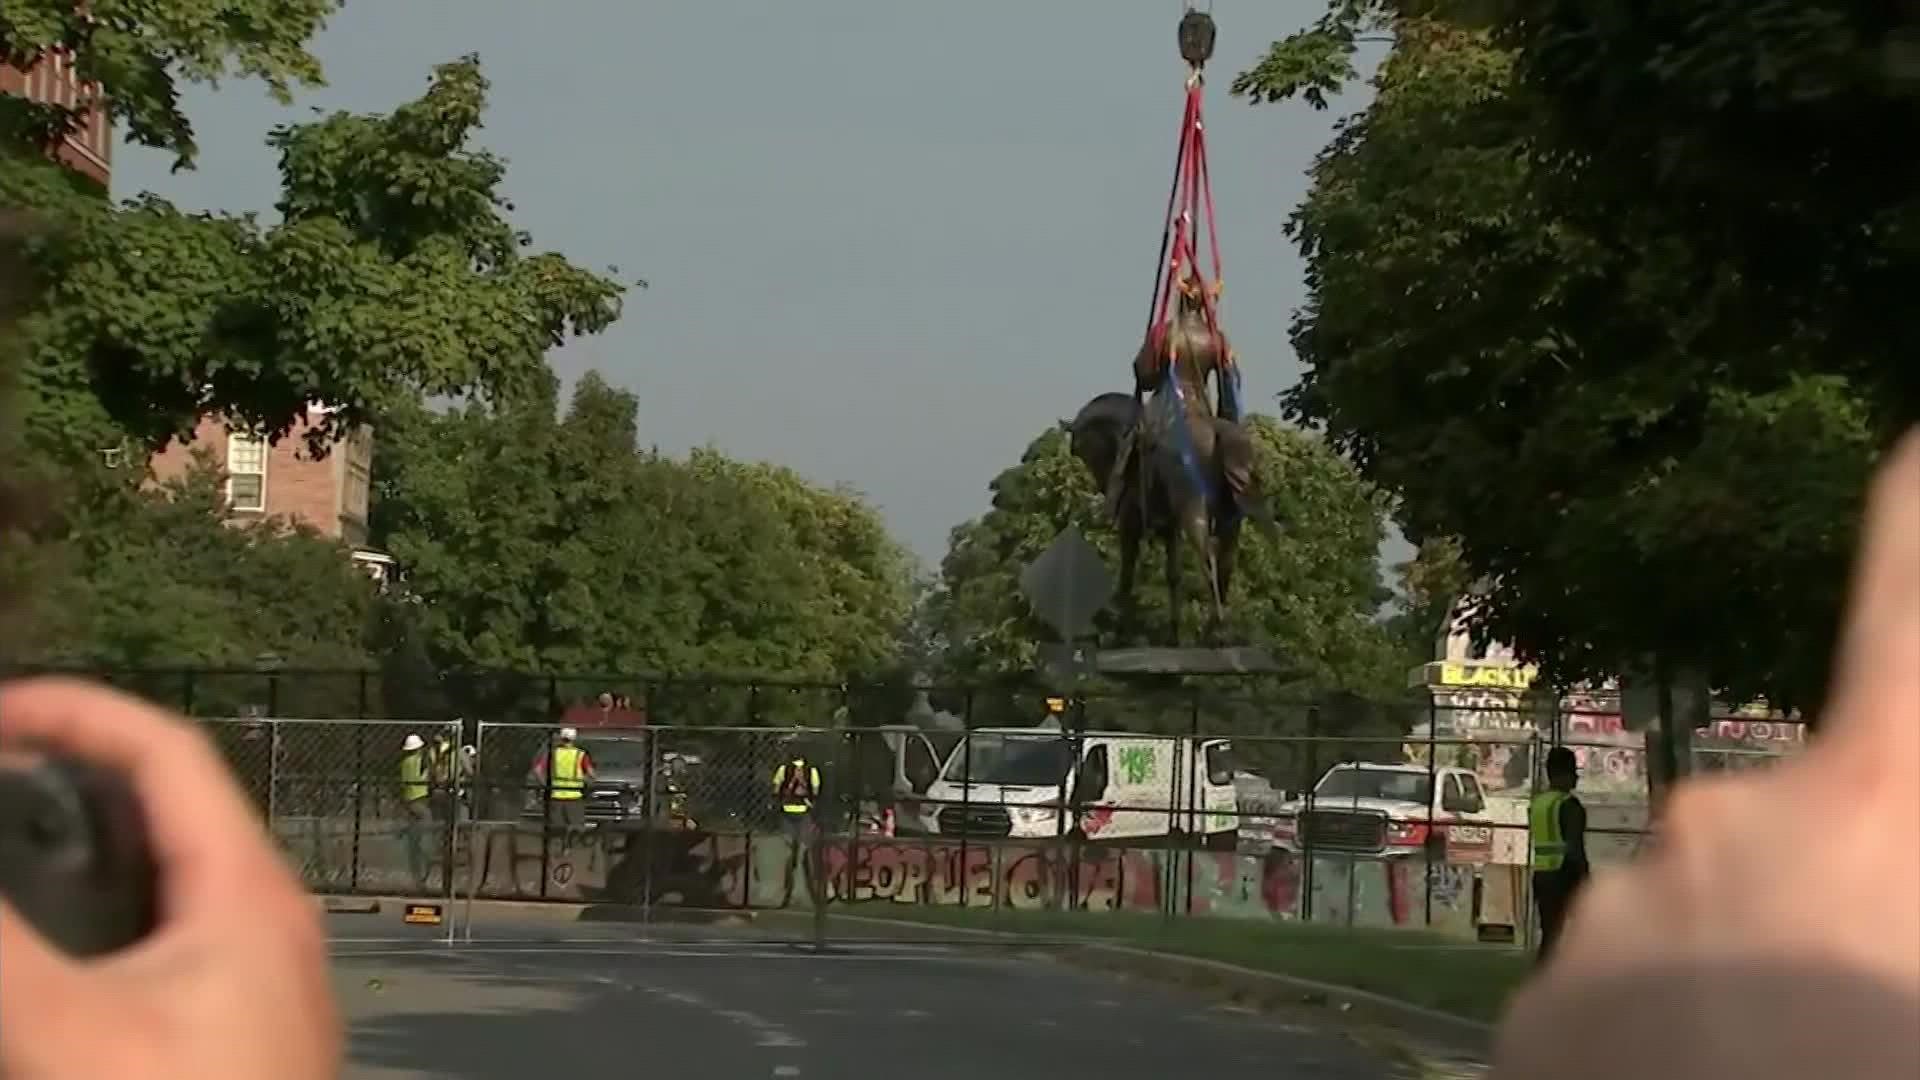 The statue of Robert E. Lee in Richmond came down Wednesday after the Virginia Supreme Court's ruling allowing its removal.